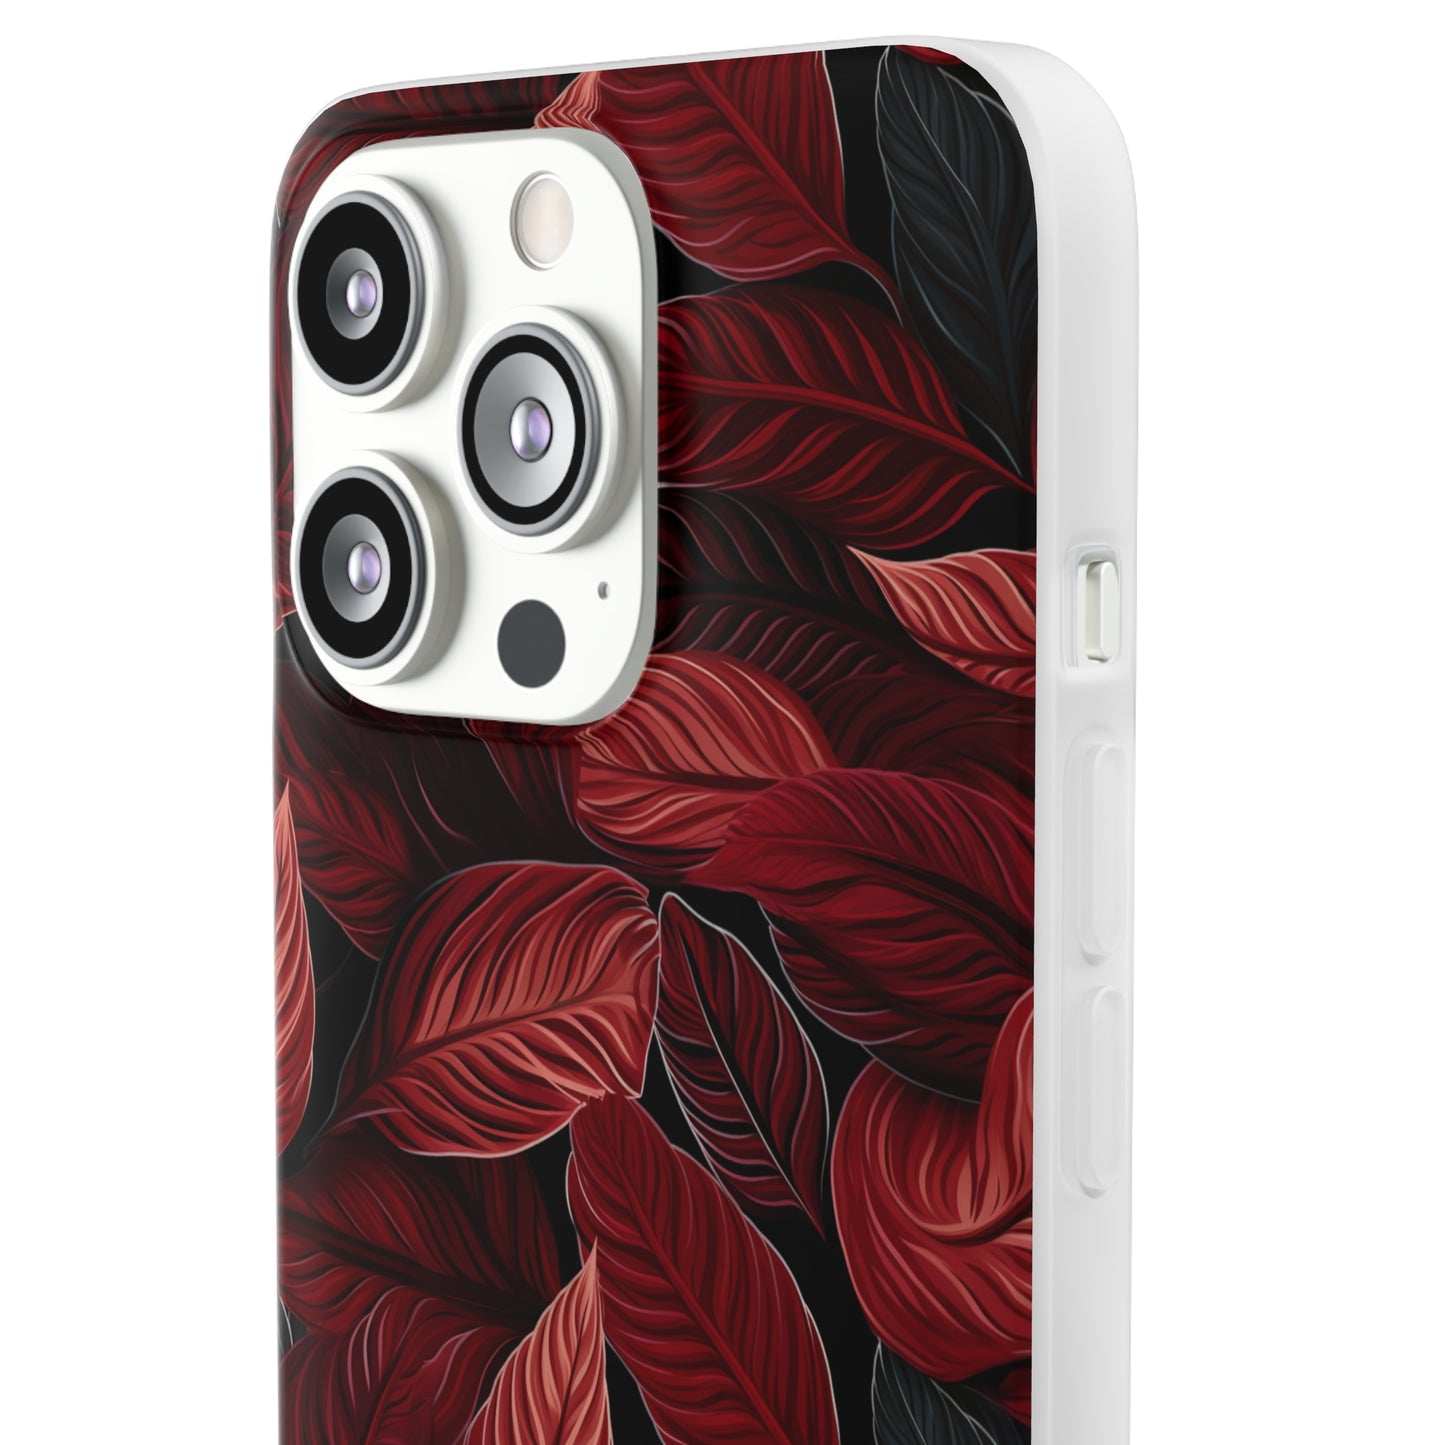 Scarlet Whispers: Lush Autumn Colours in Botanical Bliss - Flexible Phone Case